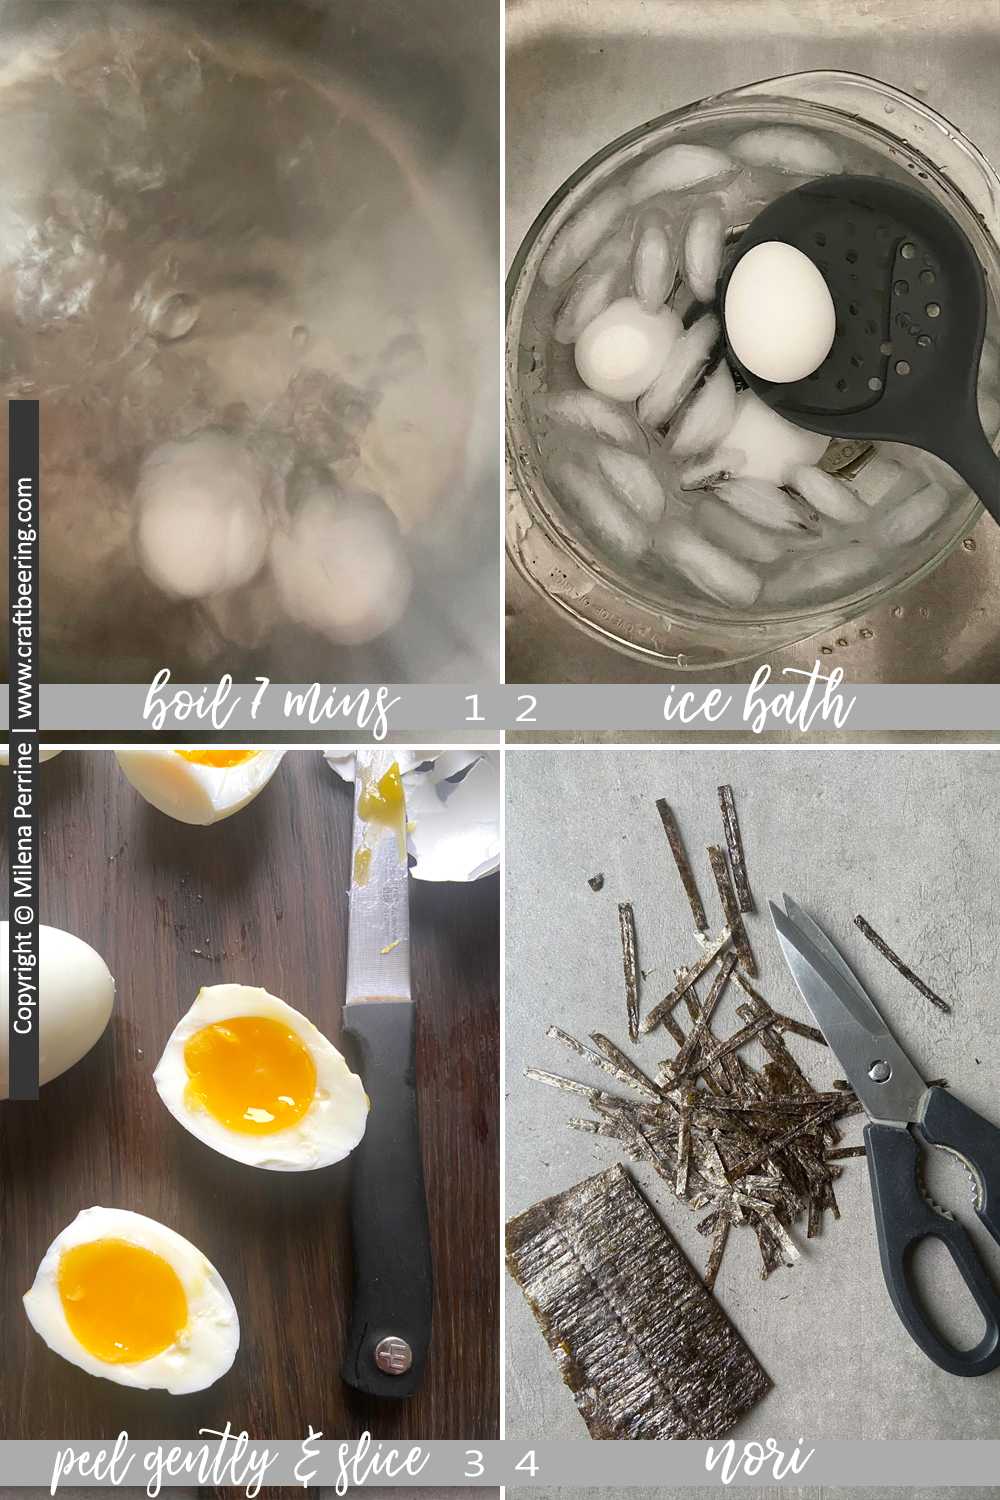 Step by step how to make soft boiled eggs for ramen bowls or a tasty snack.